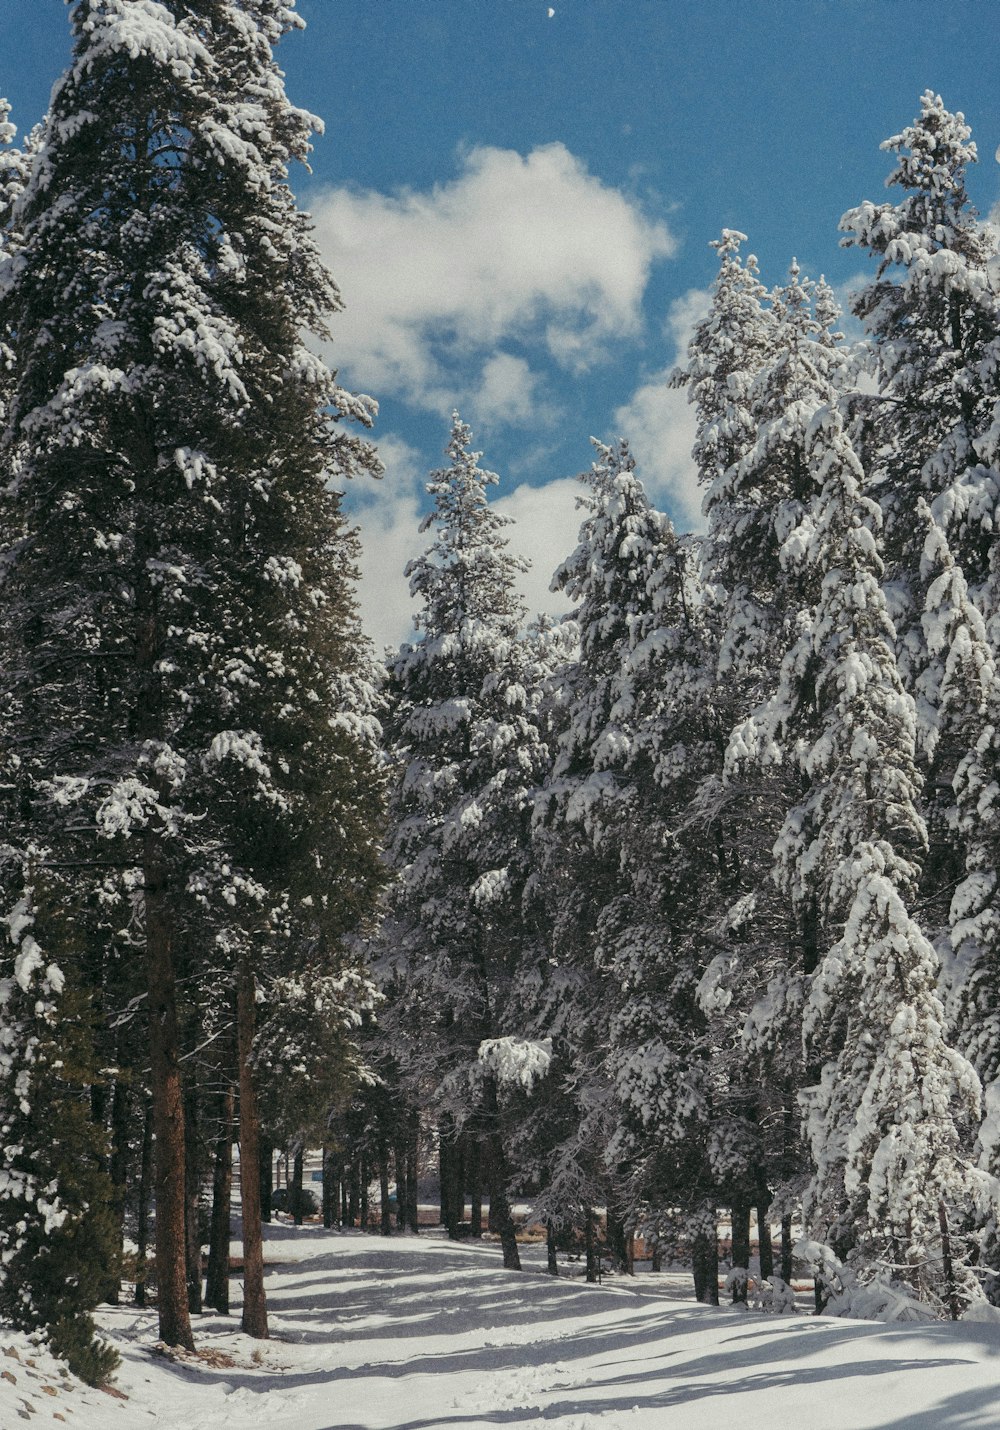 pine trees with snows during daytime